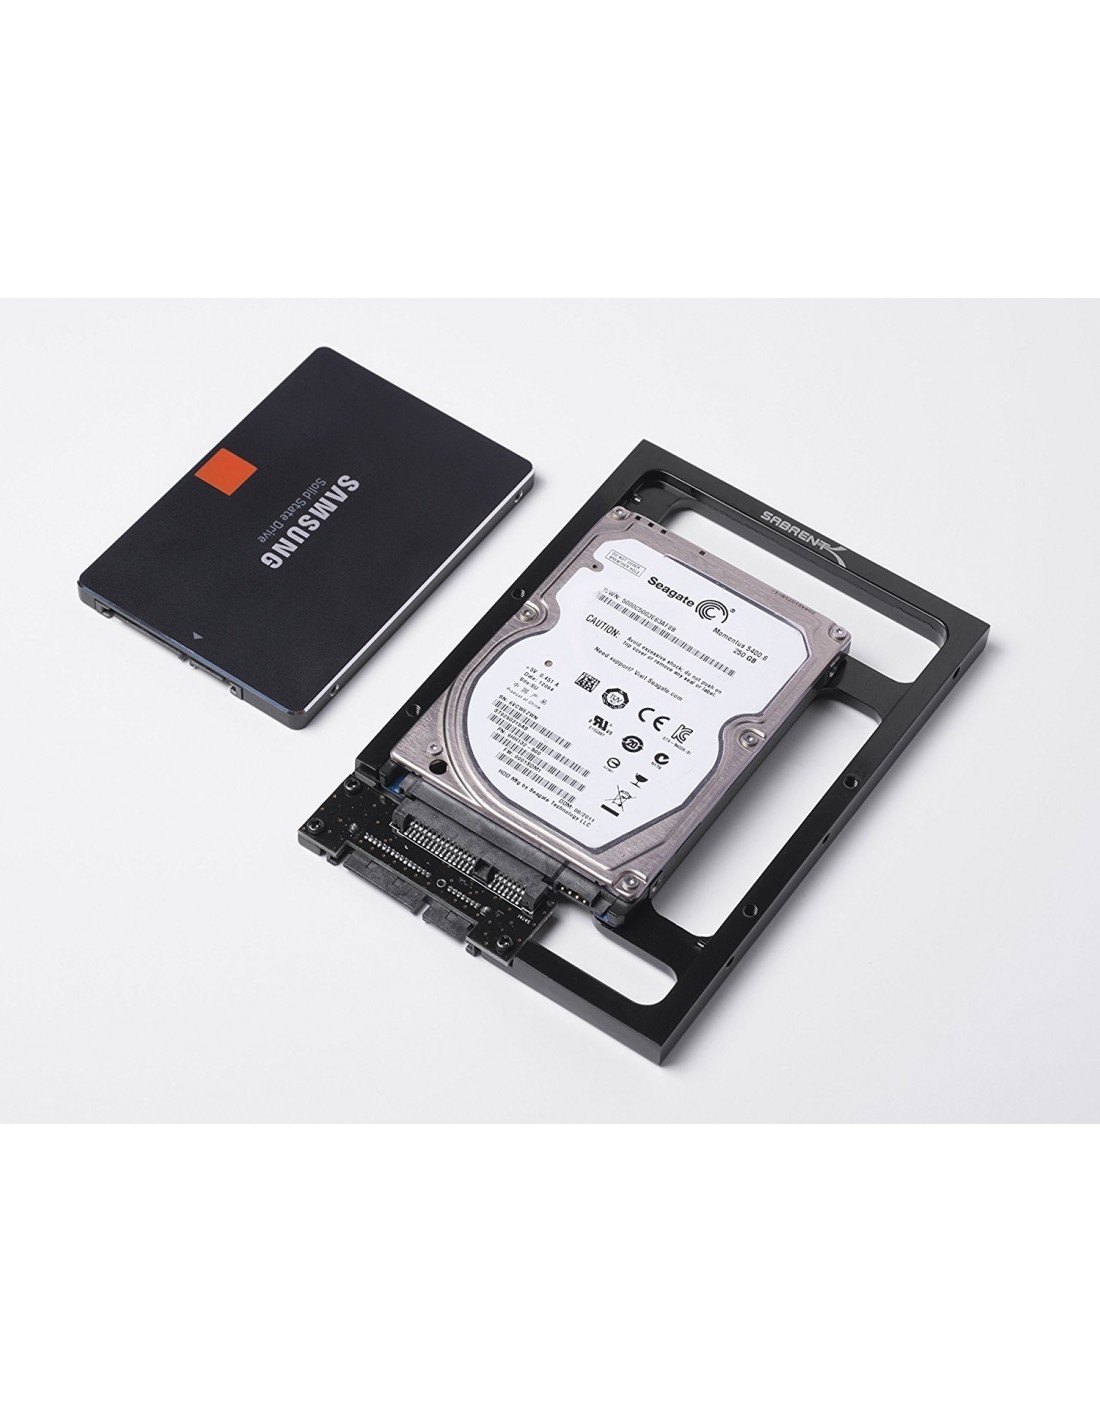 Ssd or hdd for steam фото 93